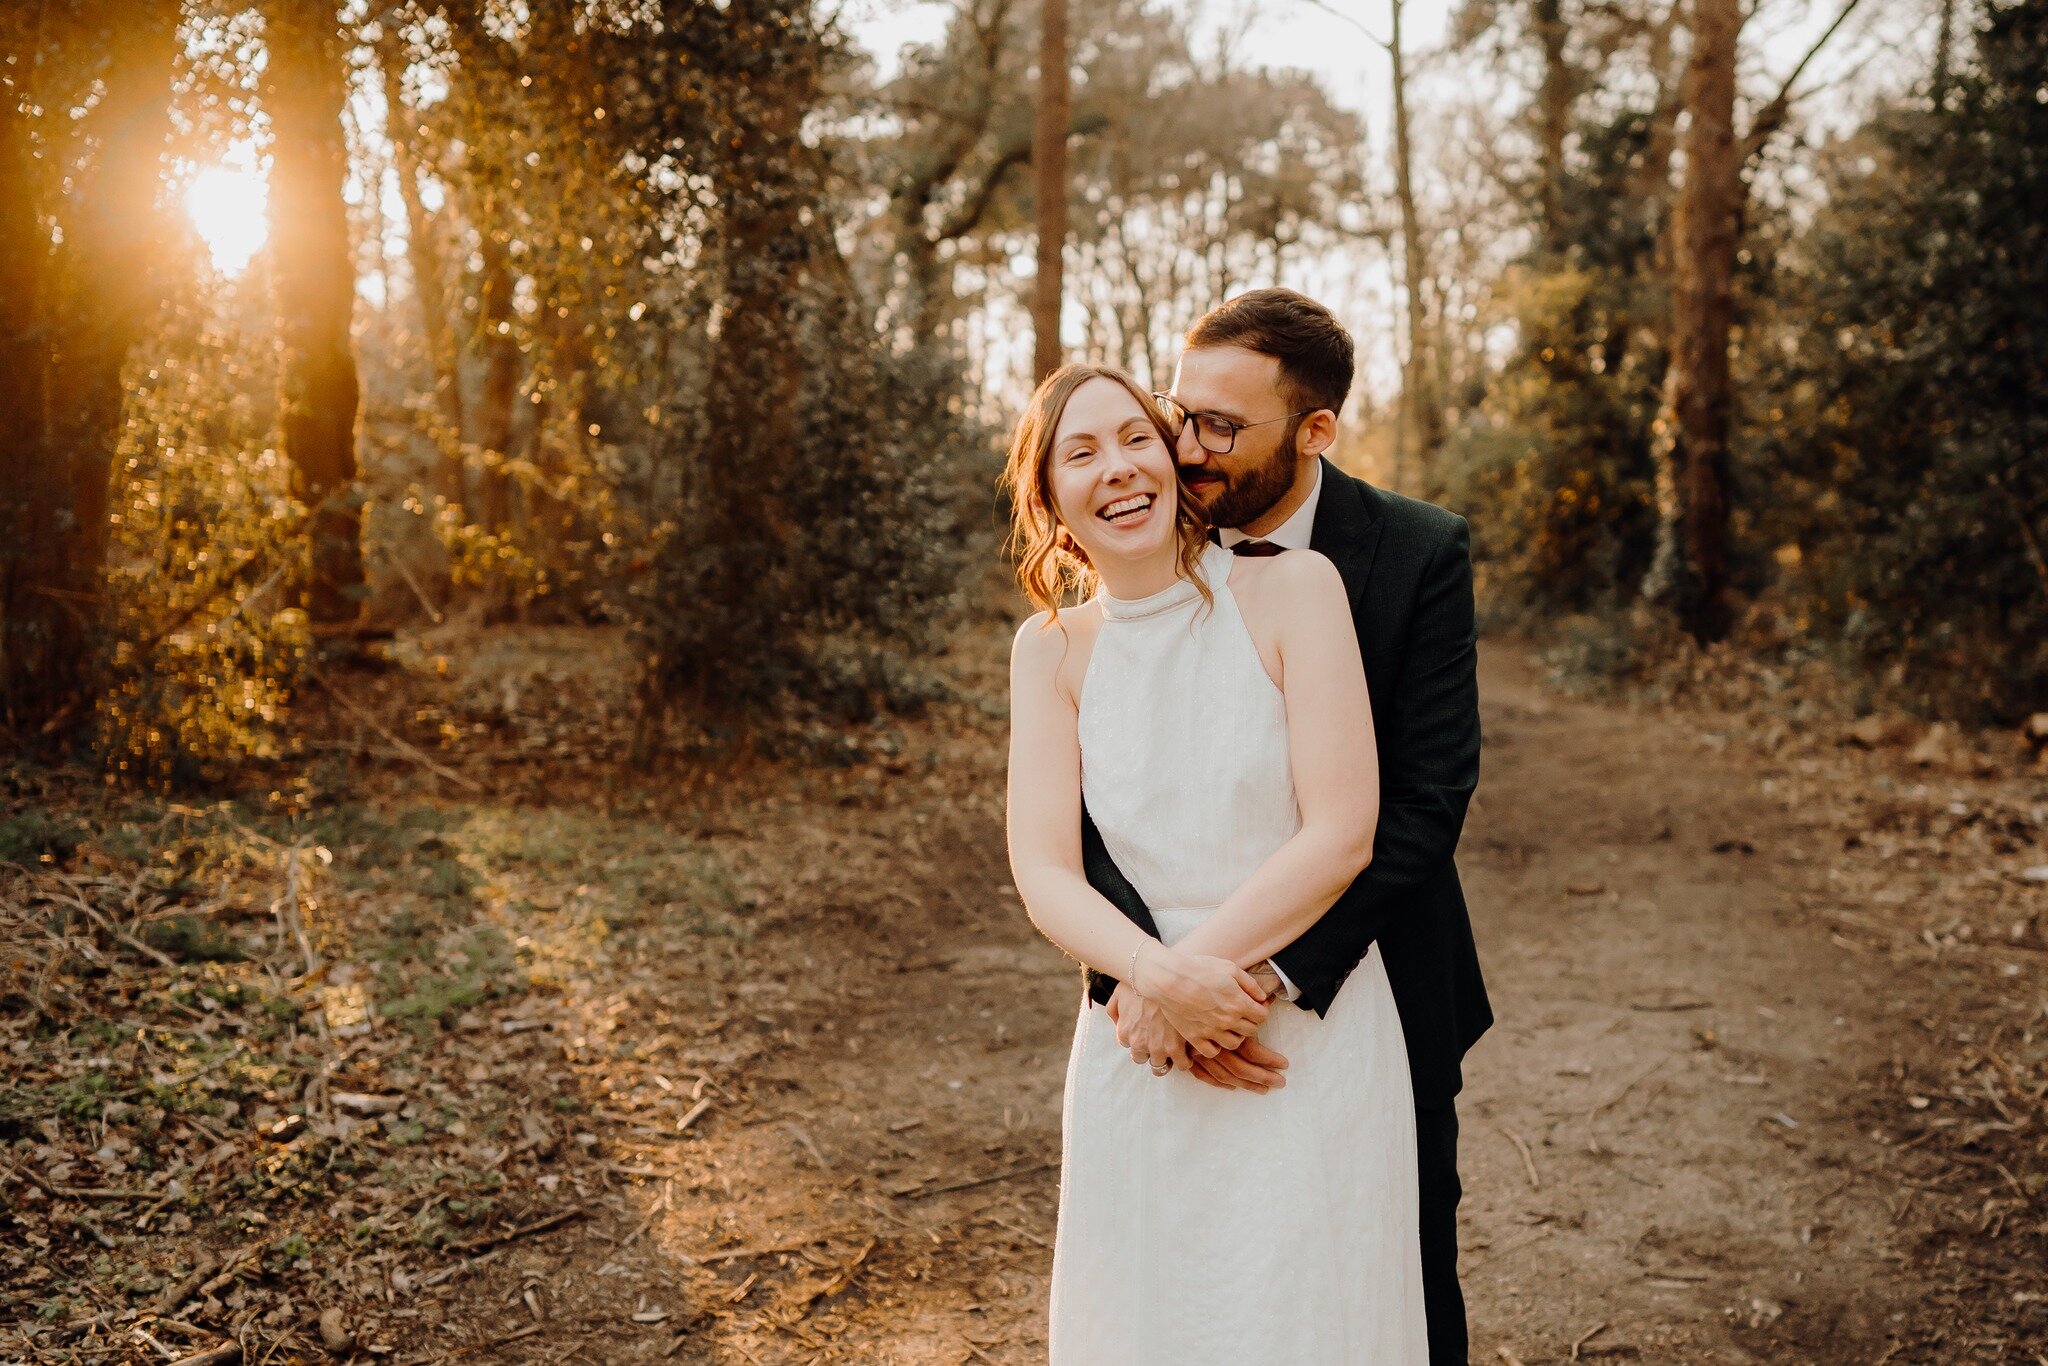 Congratulations to Kathryn &amp; Craig on your amazing wedding 🥰

Your sneak peeks are ready and I hope you love them as much as I do!! 

#surrey #surreybride #surreyweddingphotography #surreywedding #surreybridetobe